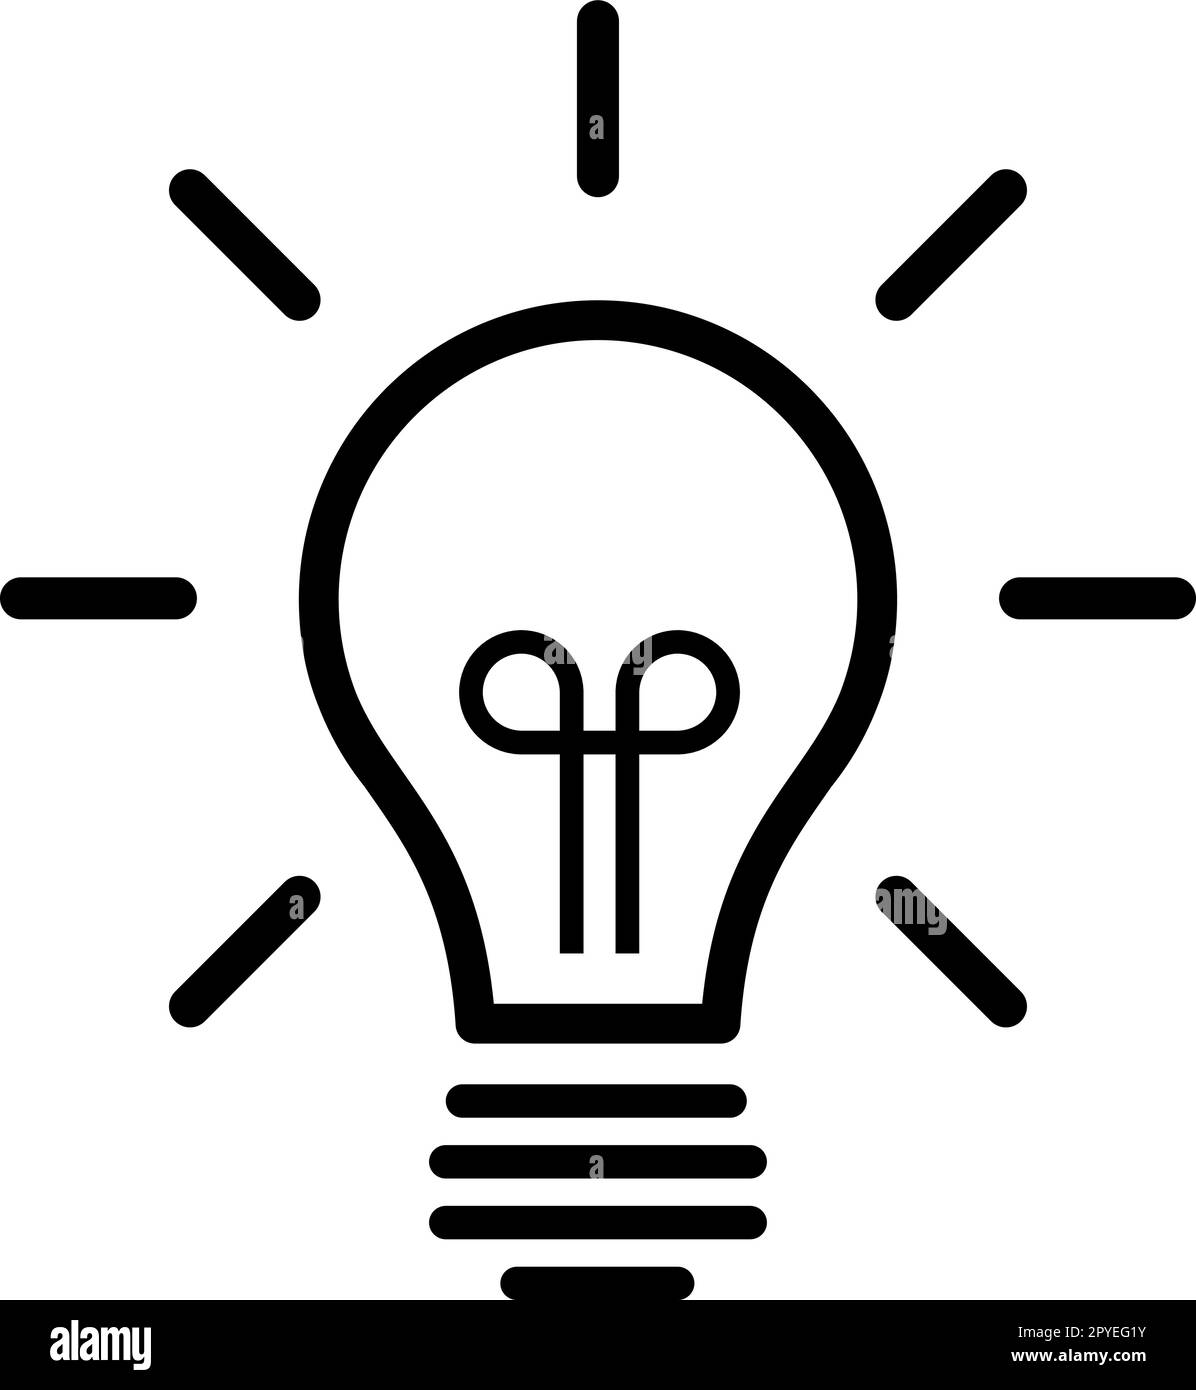 Linear bulb icon as a concept of idea generation, new vision and thinking Stock Vector